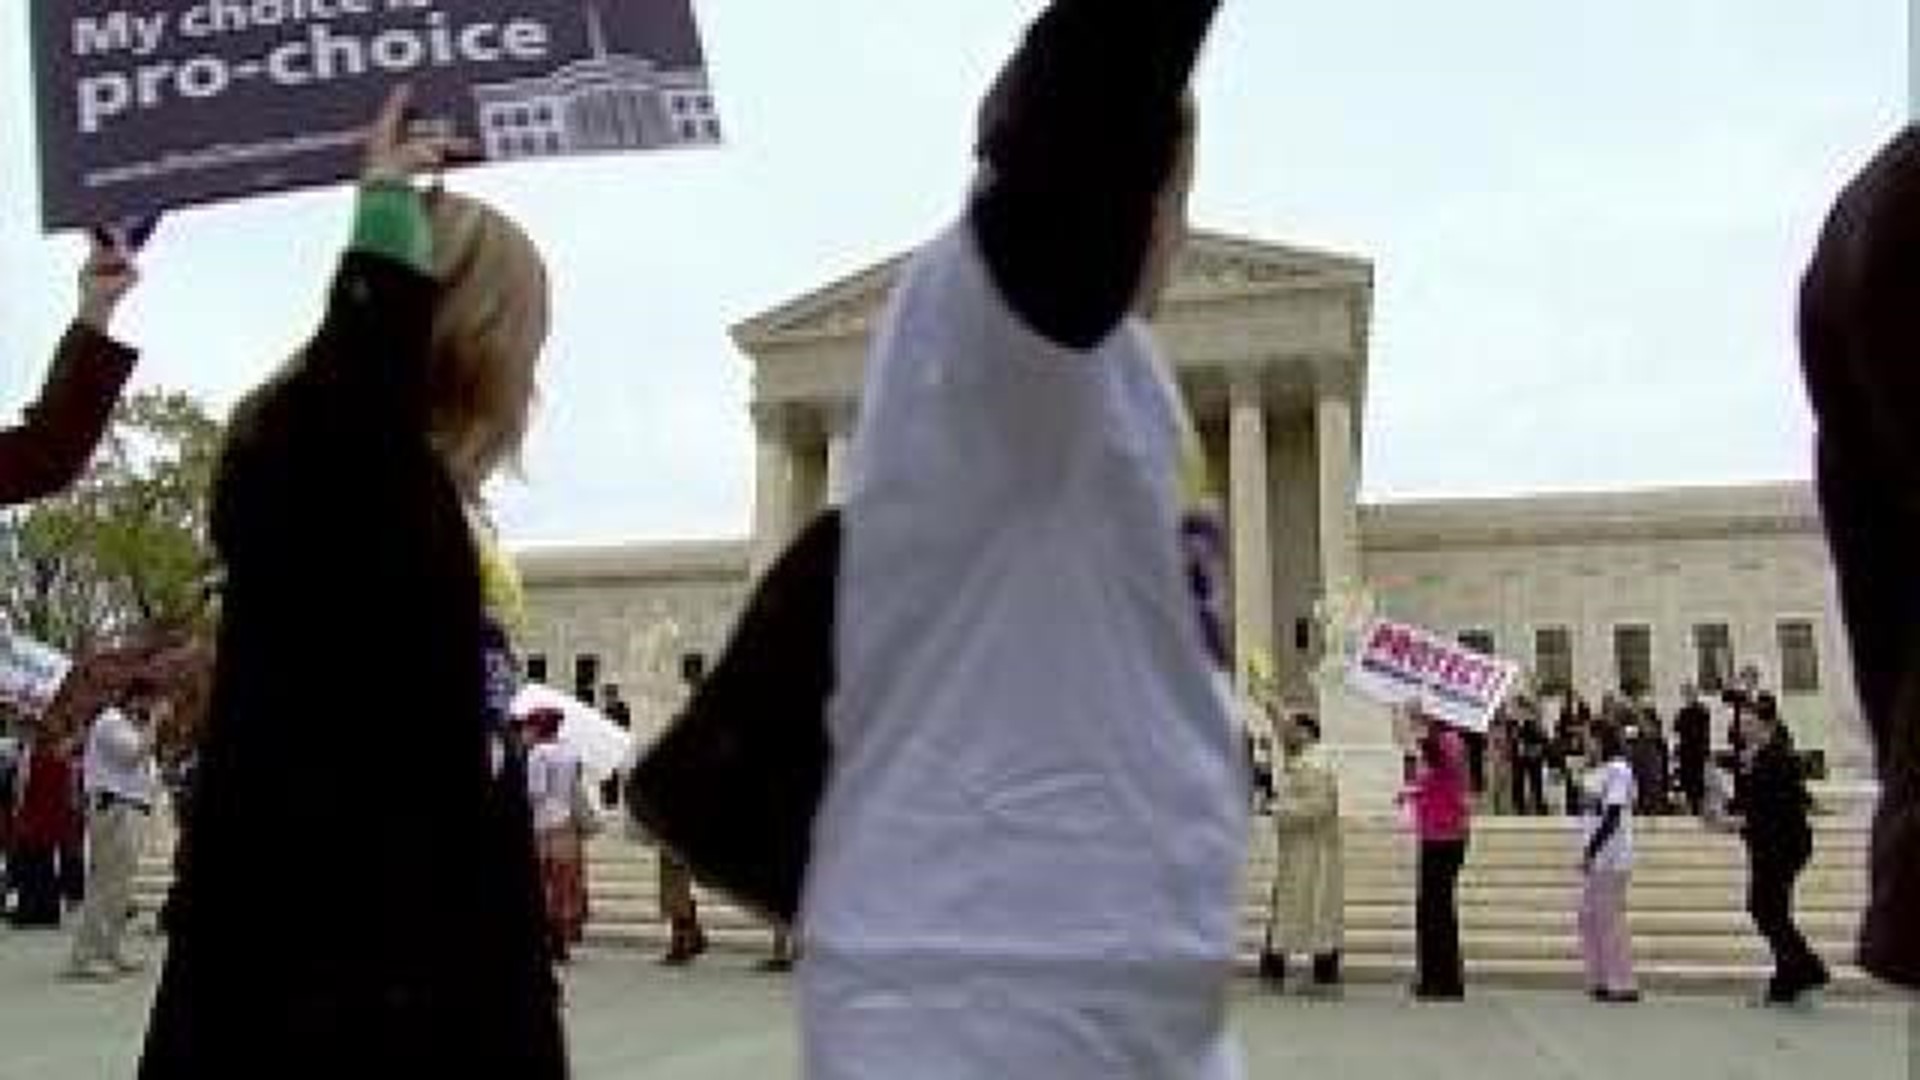 VIDEO: Organizations Ready to Fight Against Abortion Law